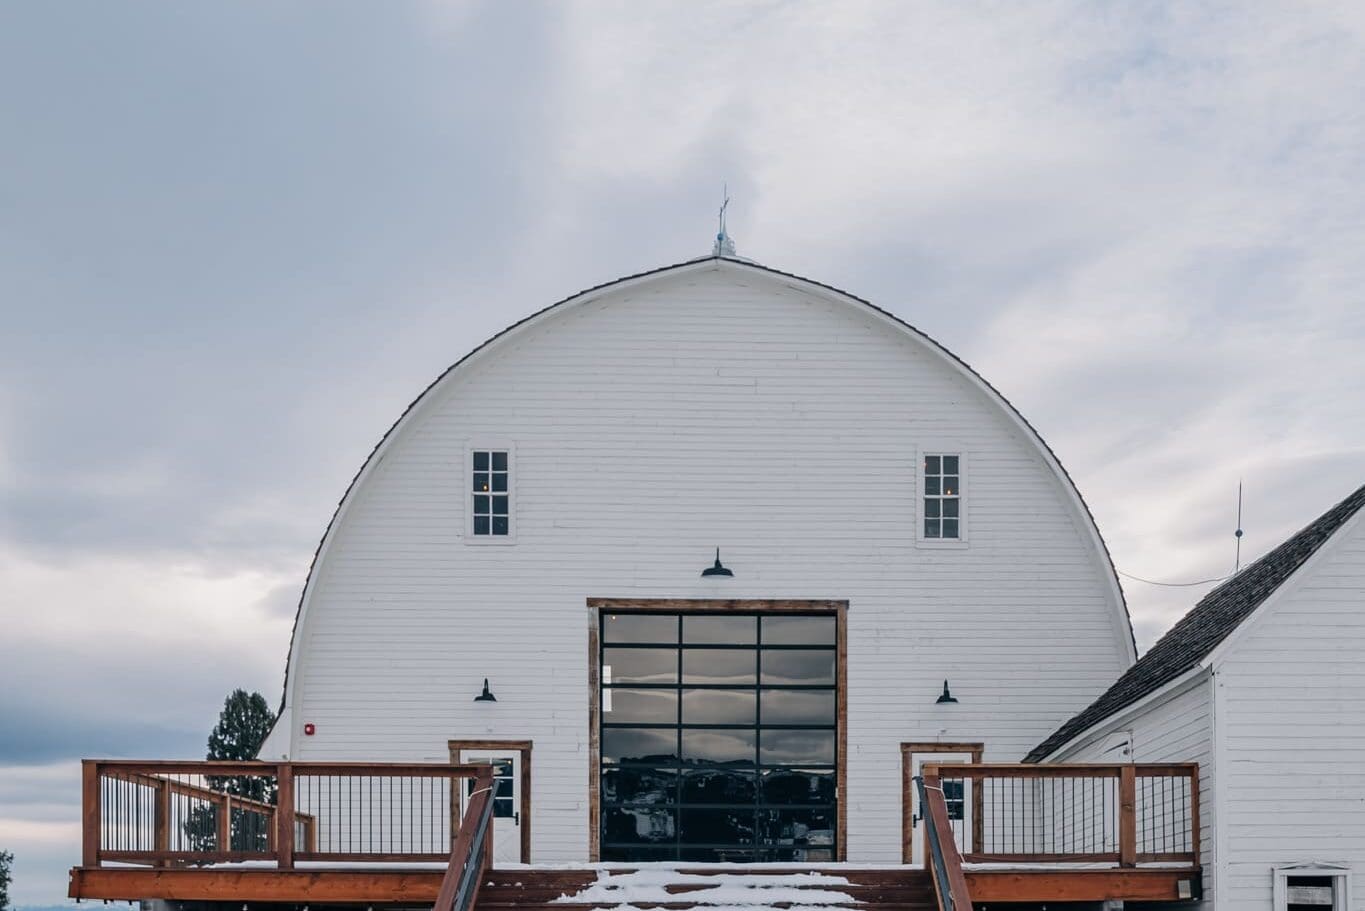 Star M Barn Photo By Charles Moll Photography